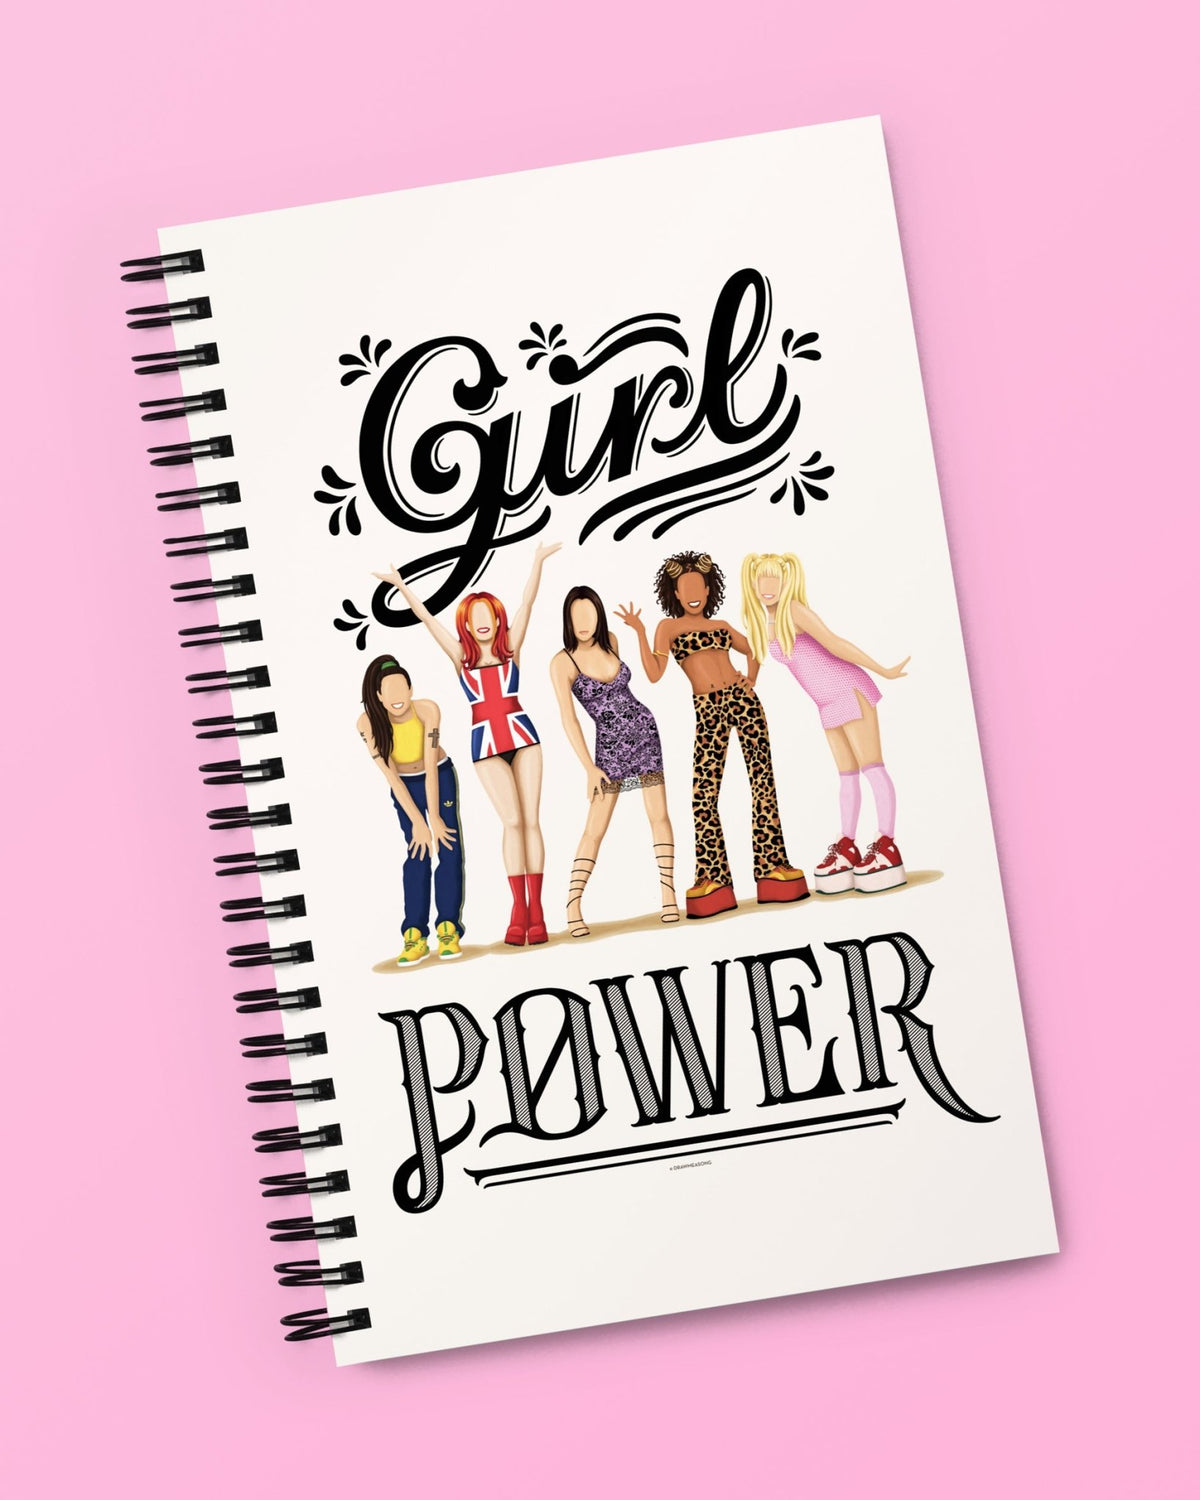 Girl　–　Girls　Notebook　a　Power　Me　Draw　Spice　Song